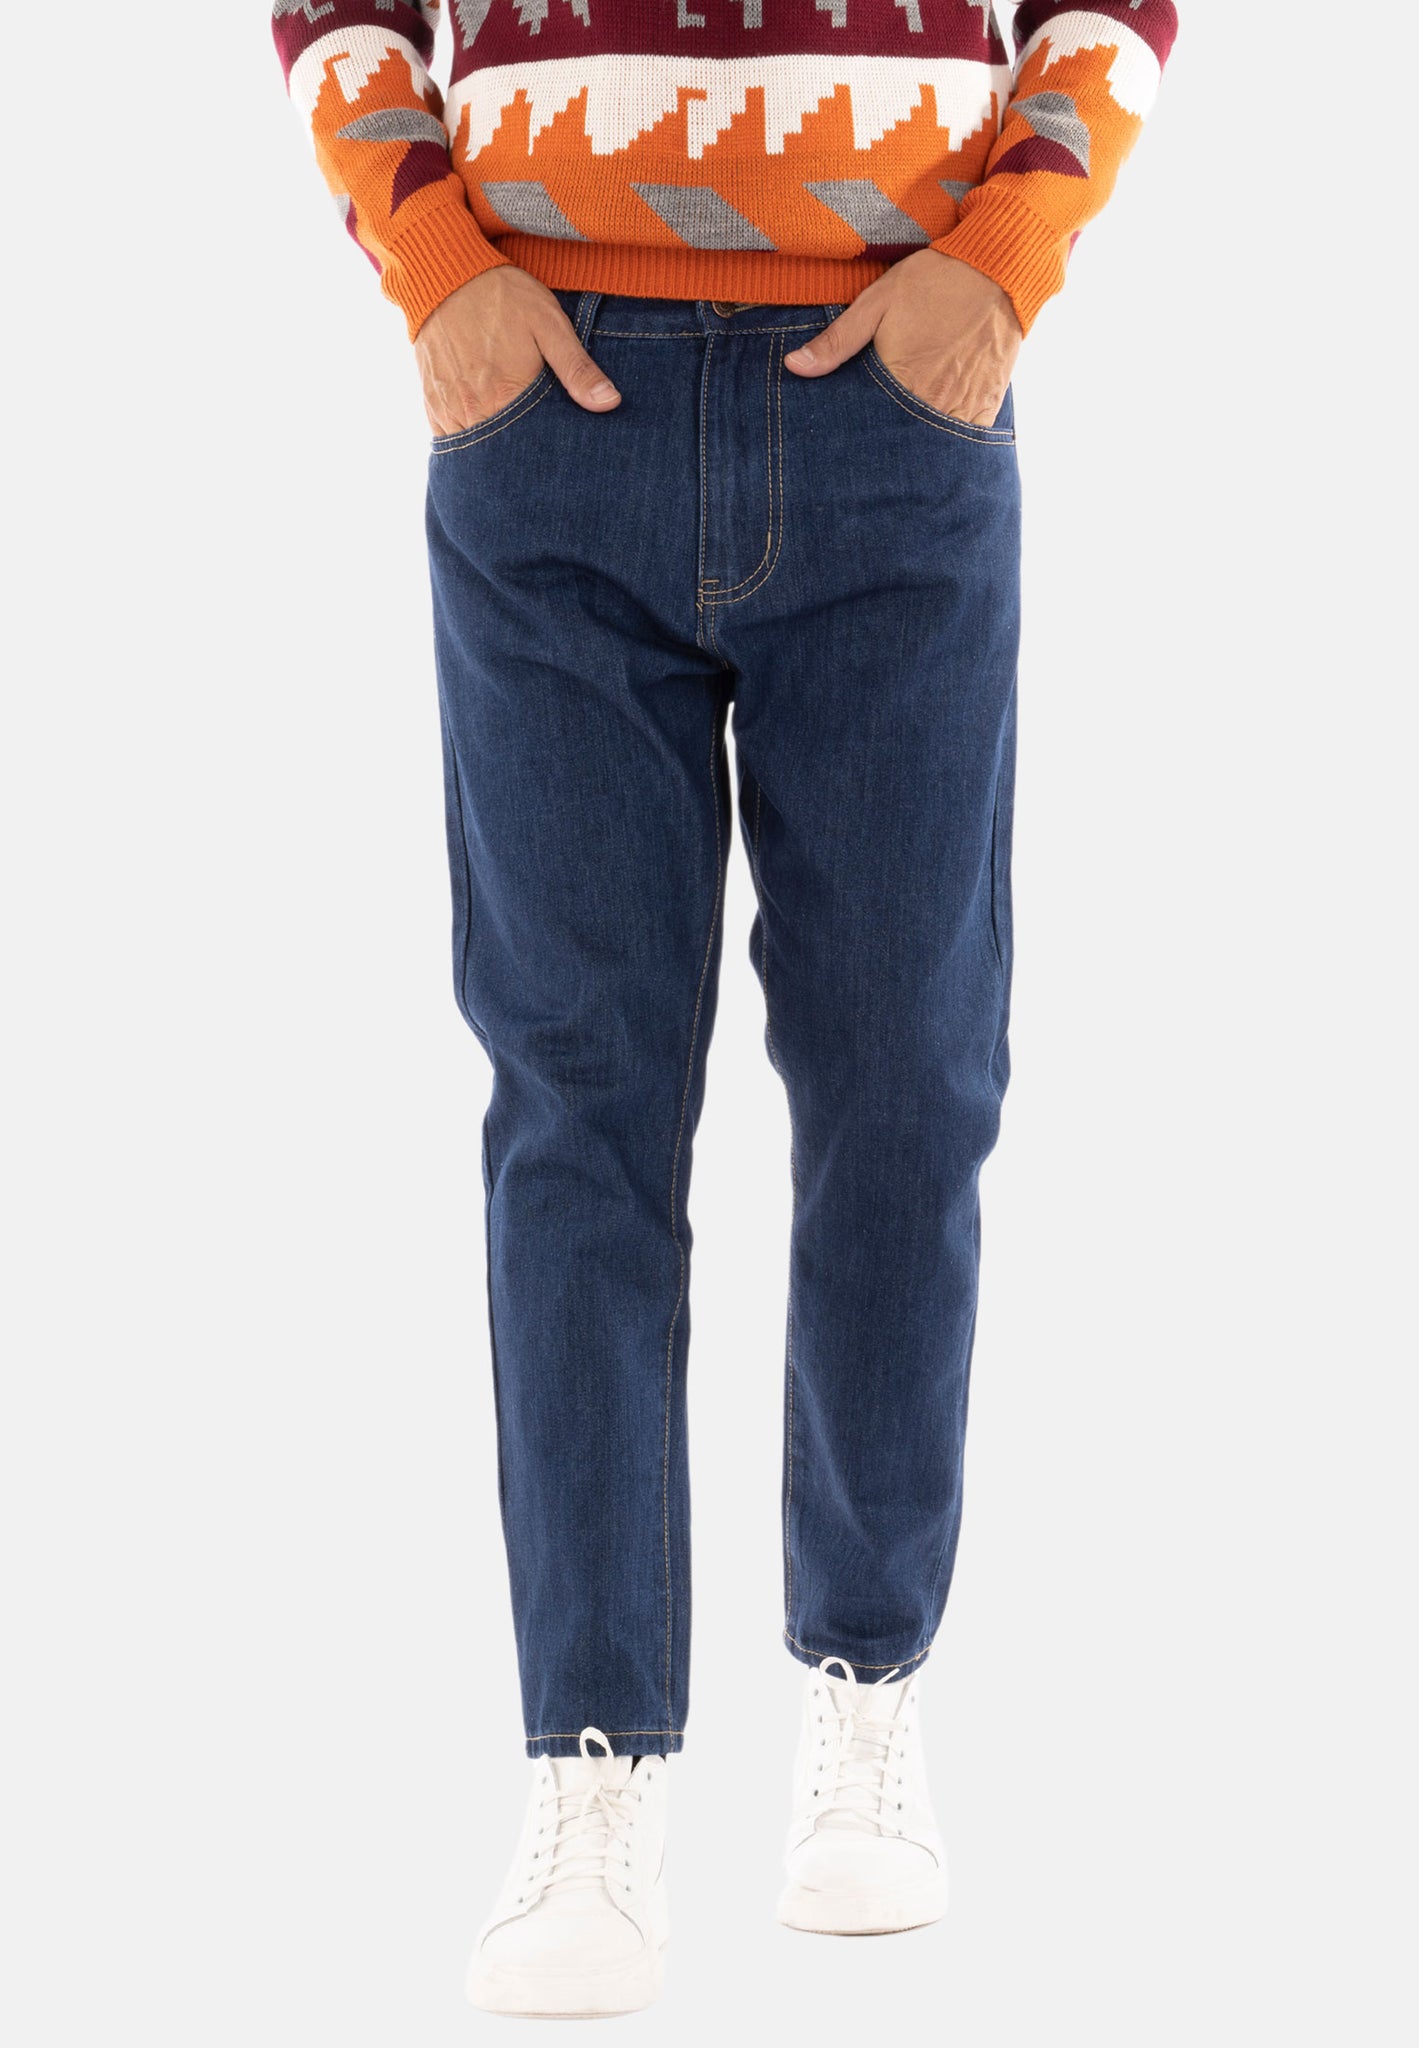 Jeans with removable drawstring belt